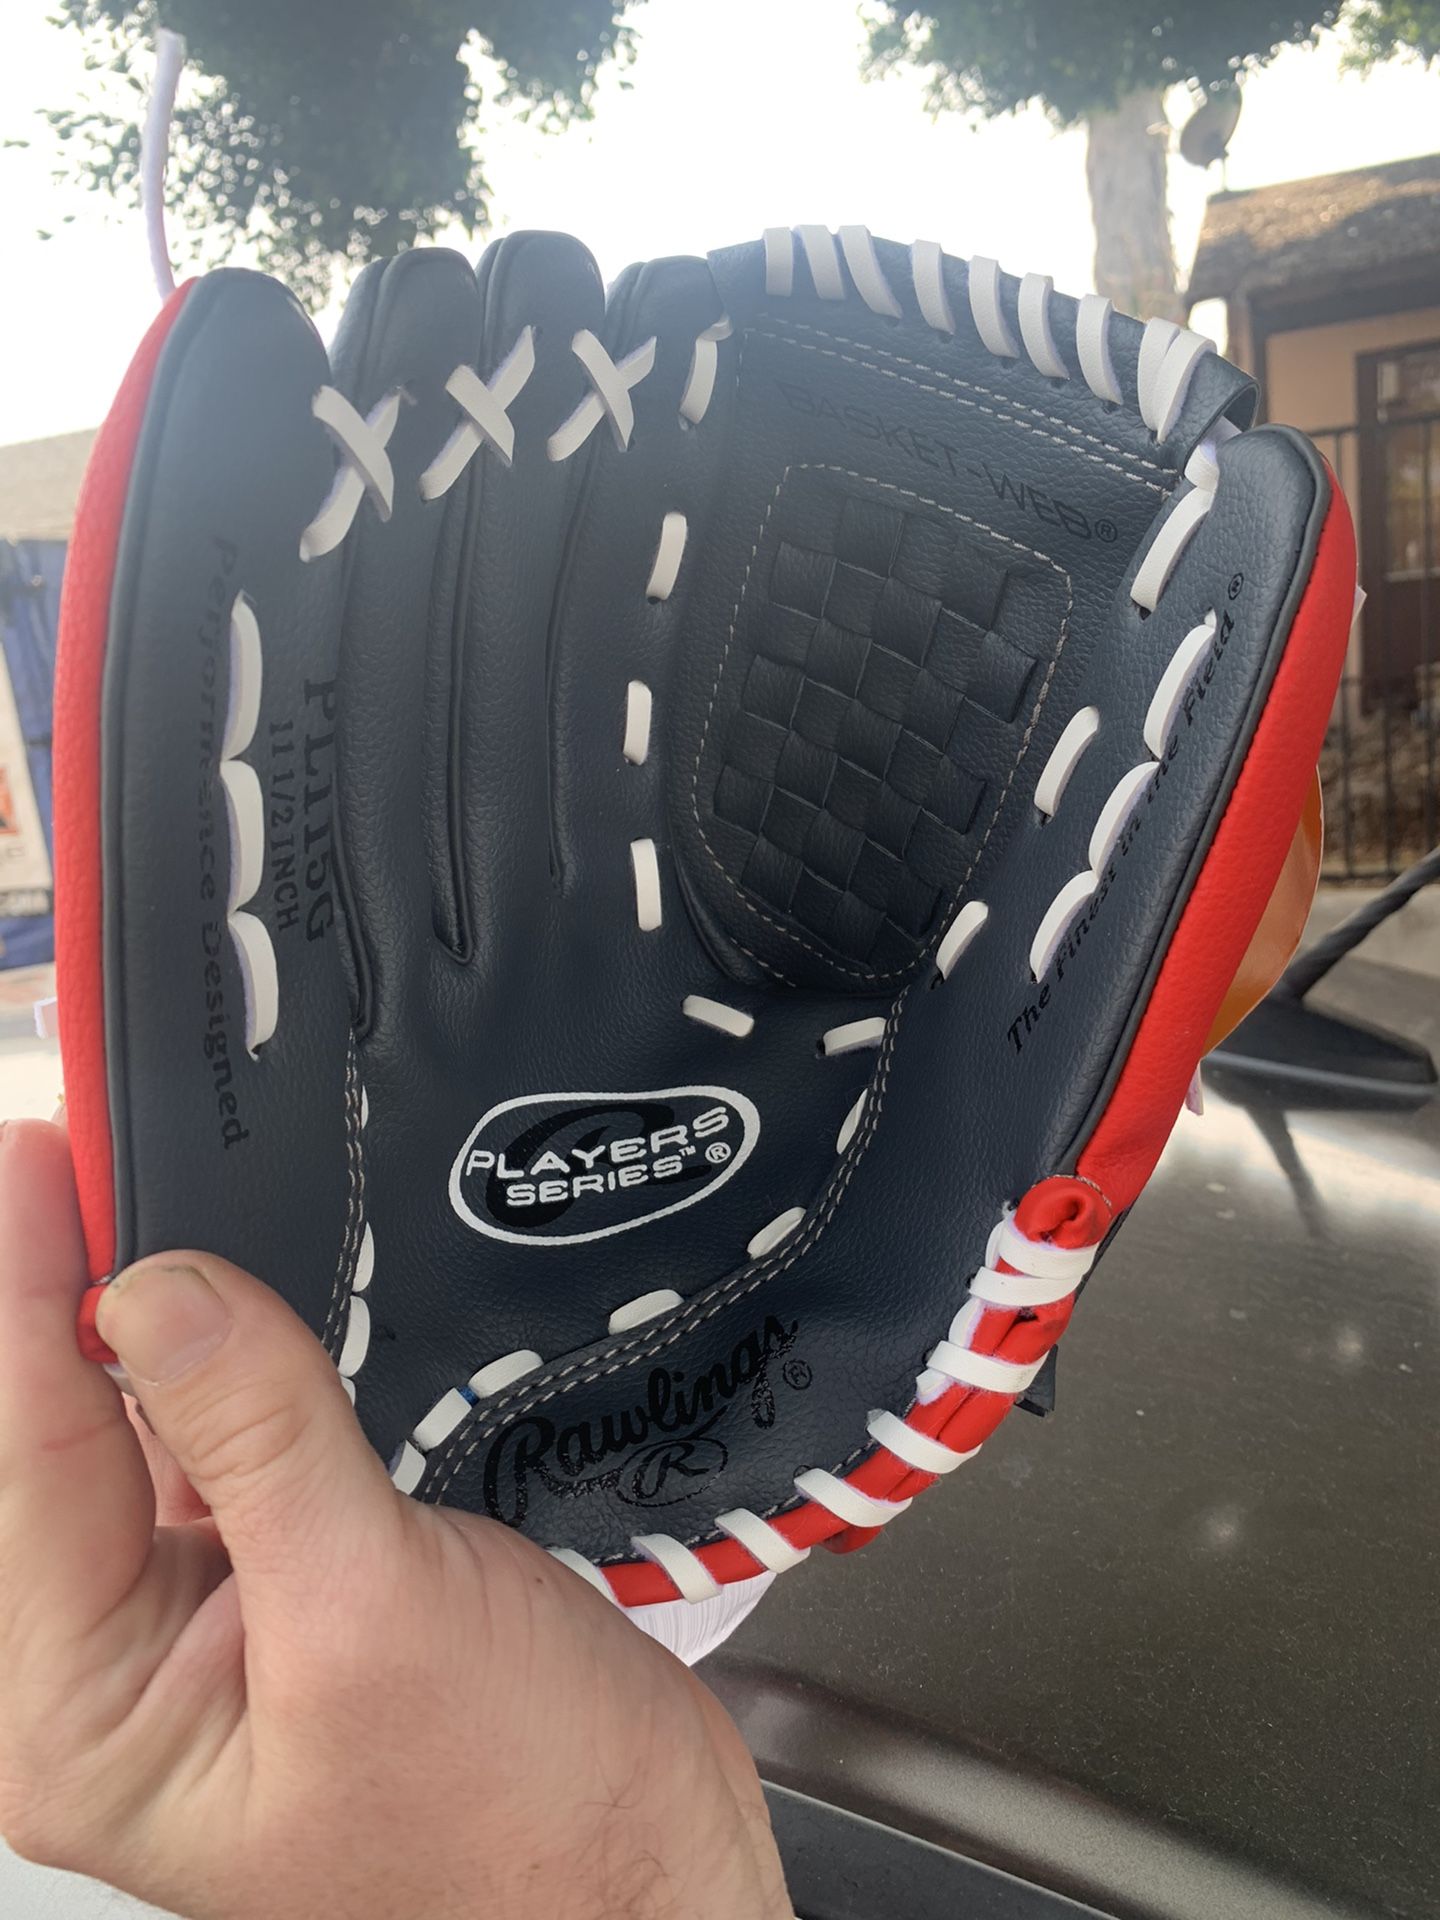 Brand new youth Baseball and Softball gloves, several available